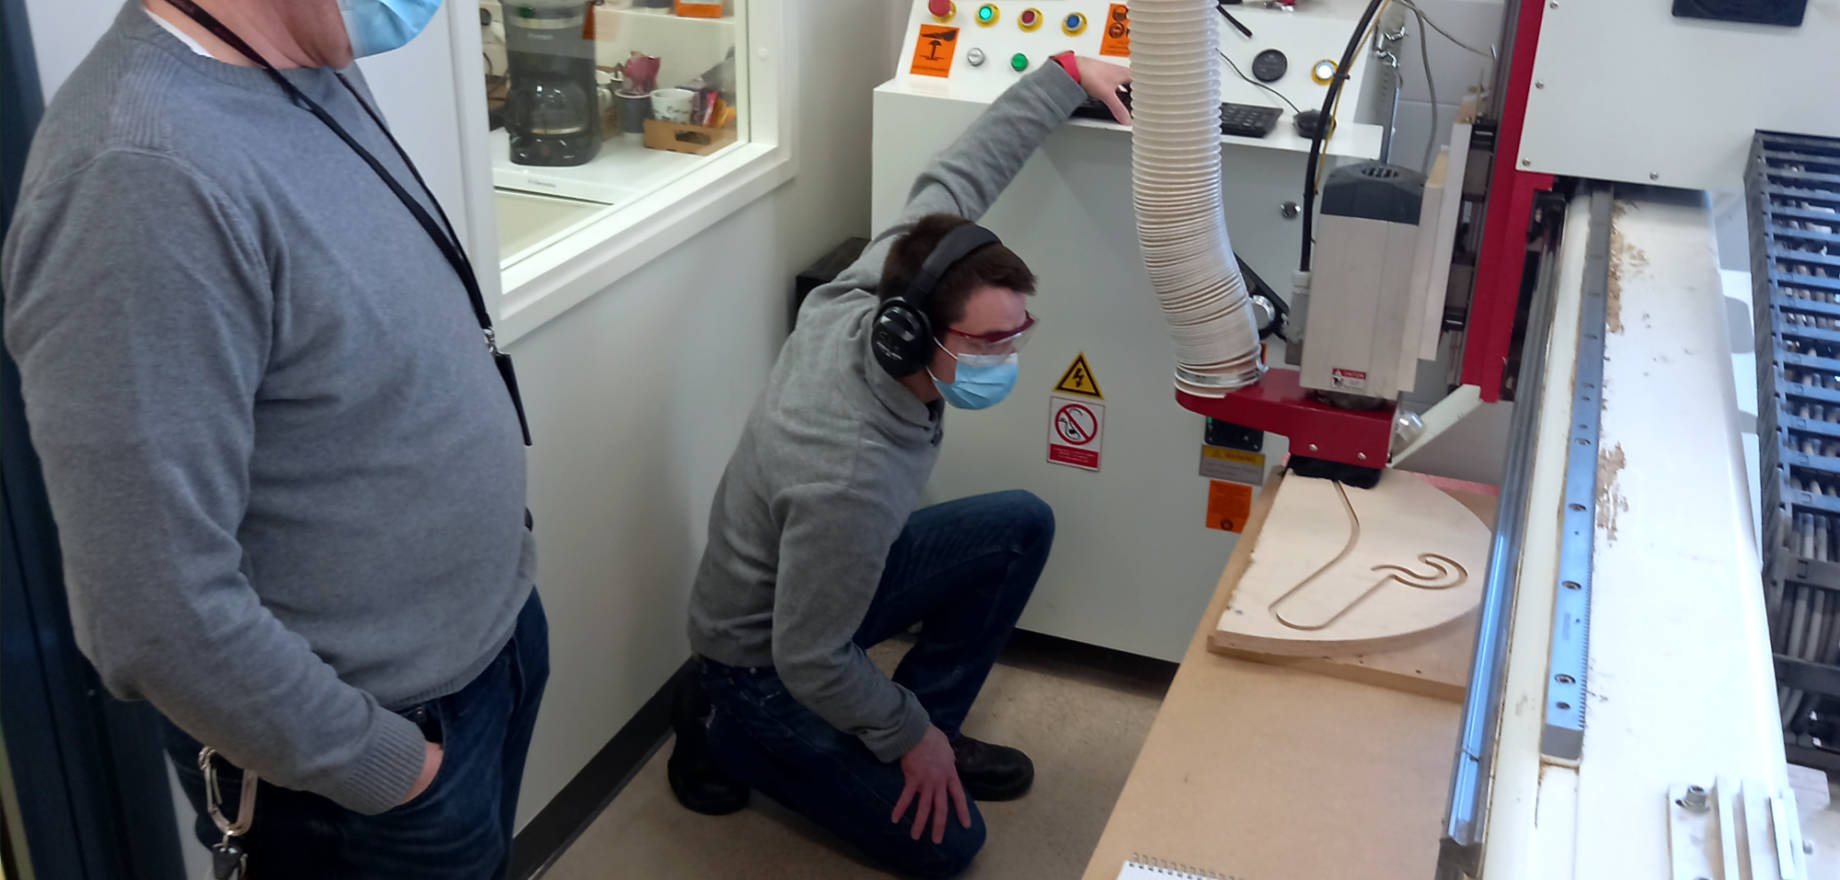 Two people in grey shirts next to a CNC machine. One of them is standing, the other one kneeling. Both are wearing hearing protection and protective eyewear and facemasks